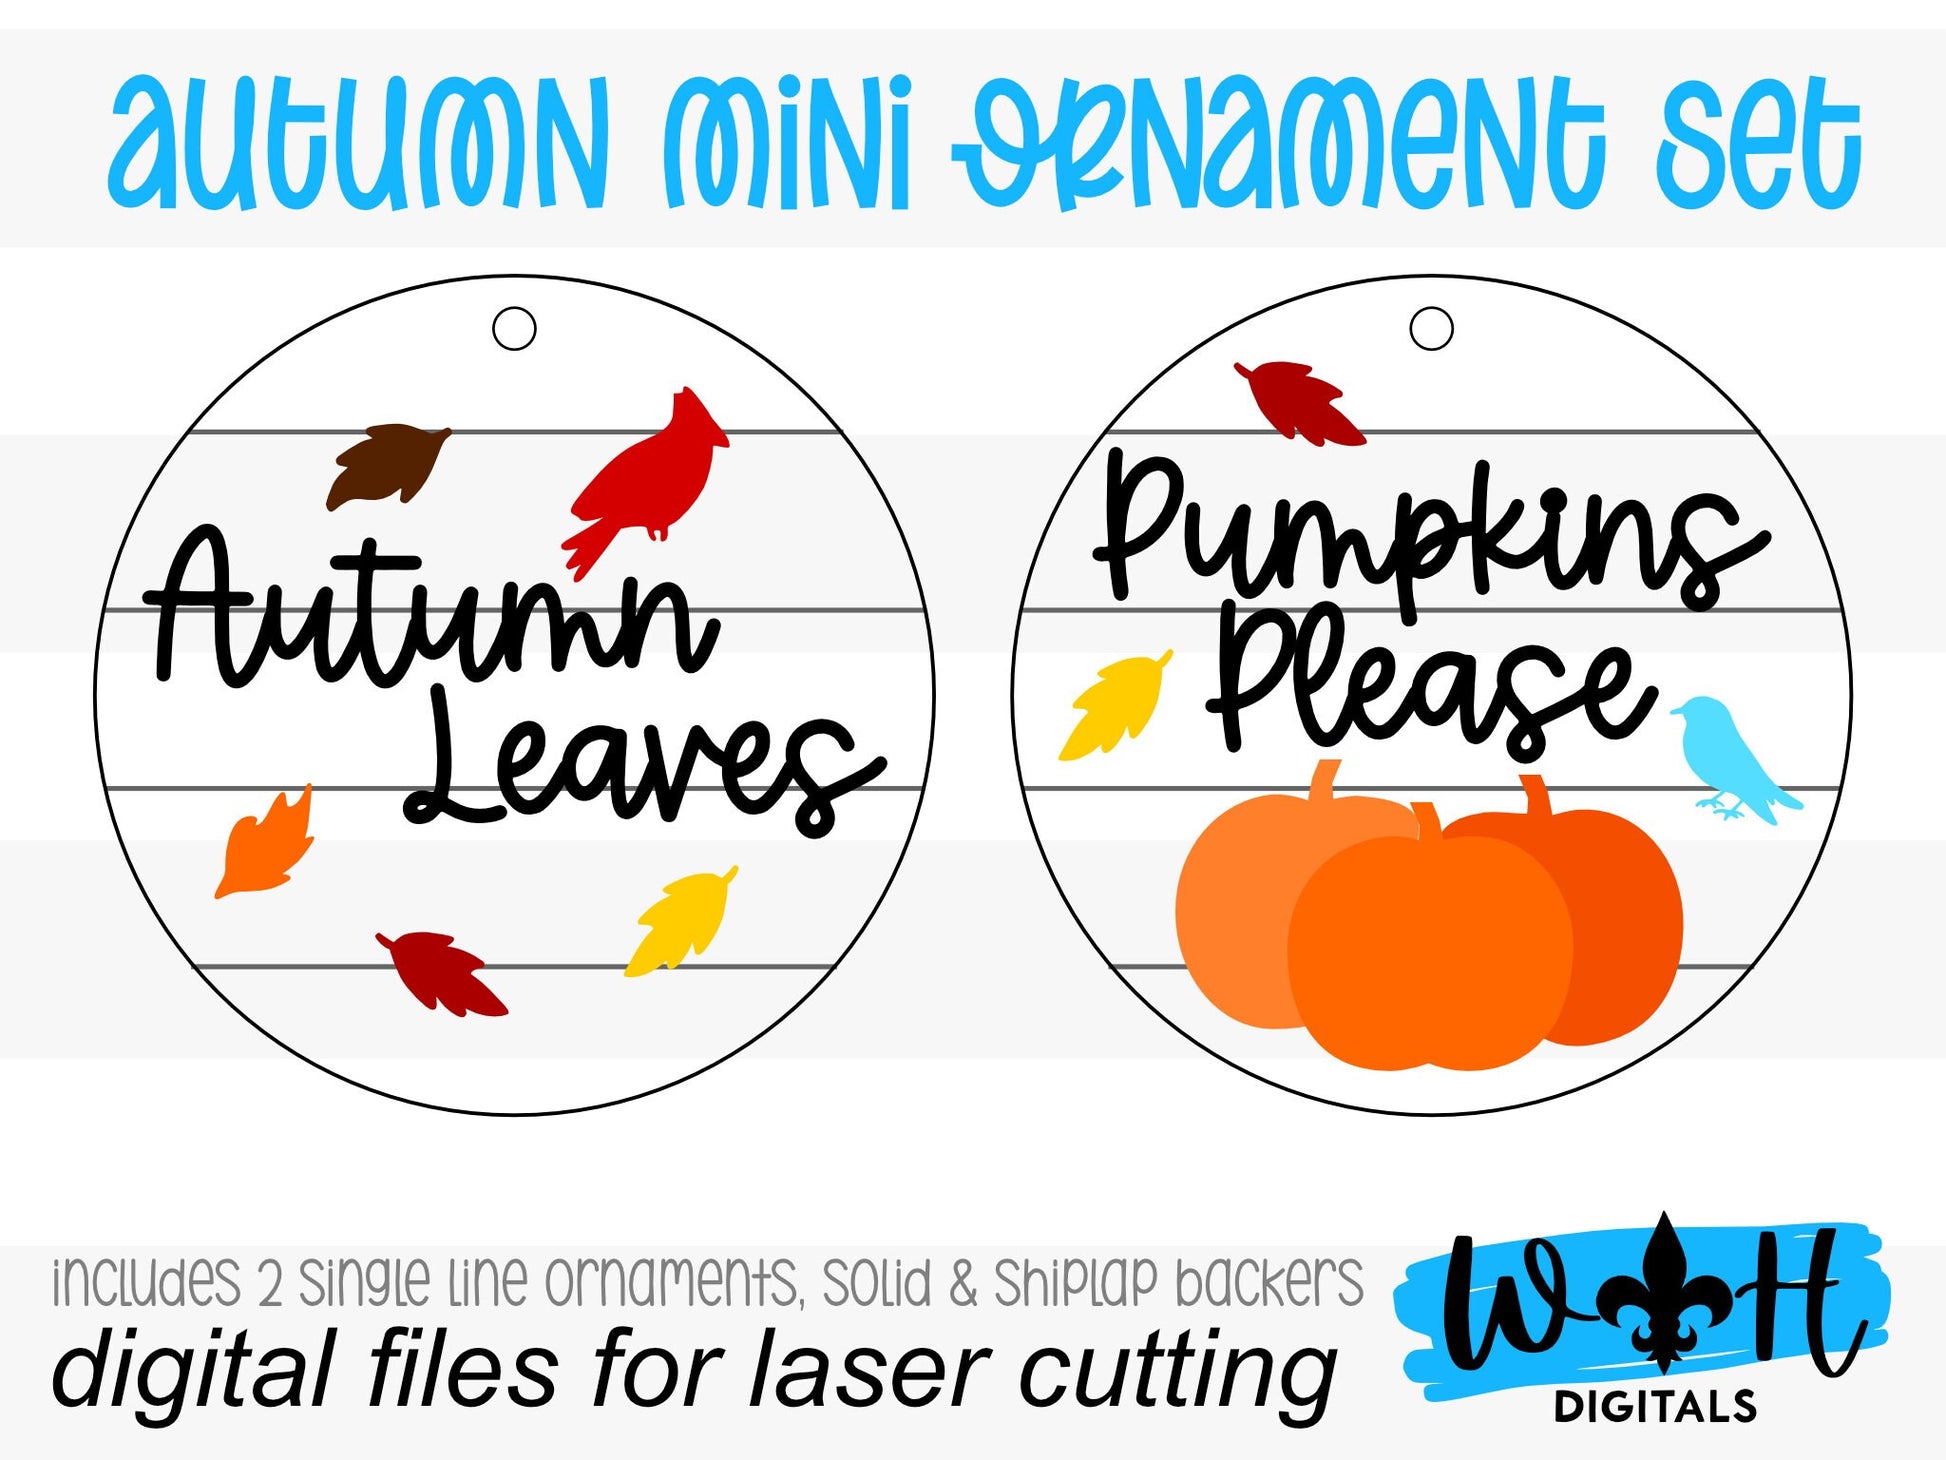 Autumn Leaves and Pumpkins Please Fall Traditions Mini Ornament Set - Files for Cutting Machines and Glowforge Lasers - Digital SVG File